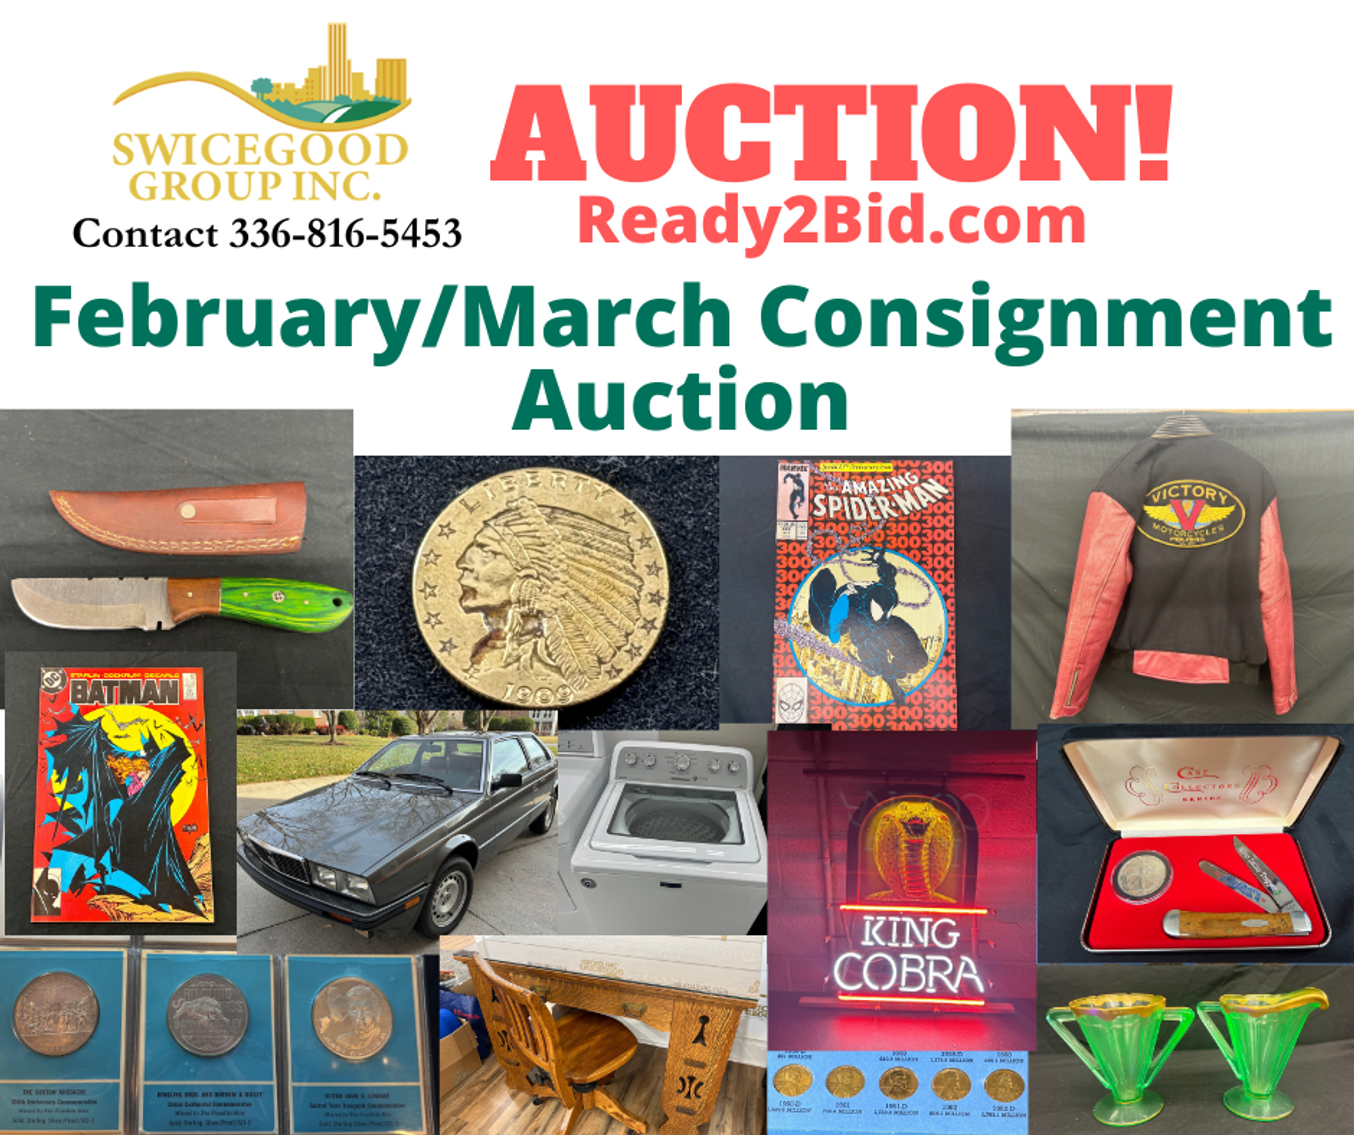 February/March Consignment Auction